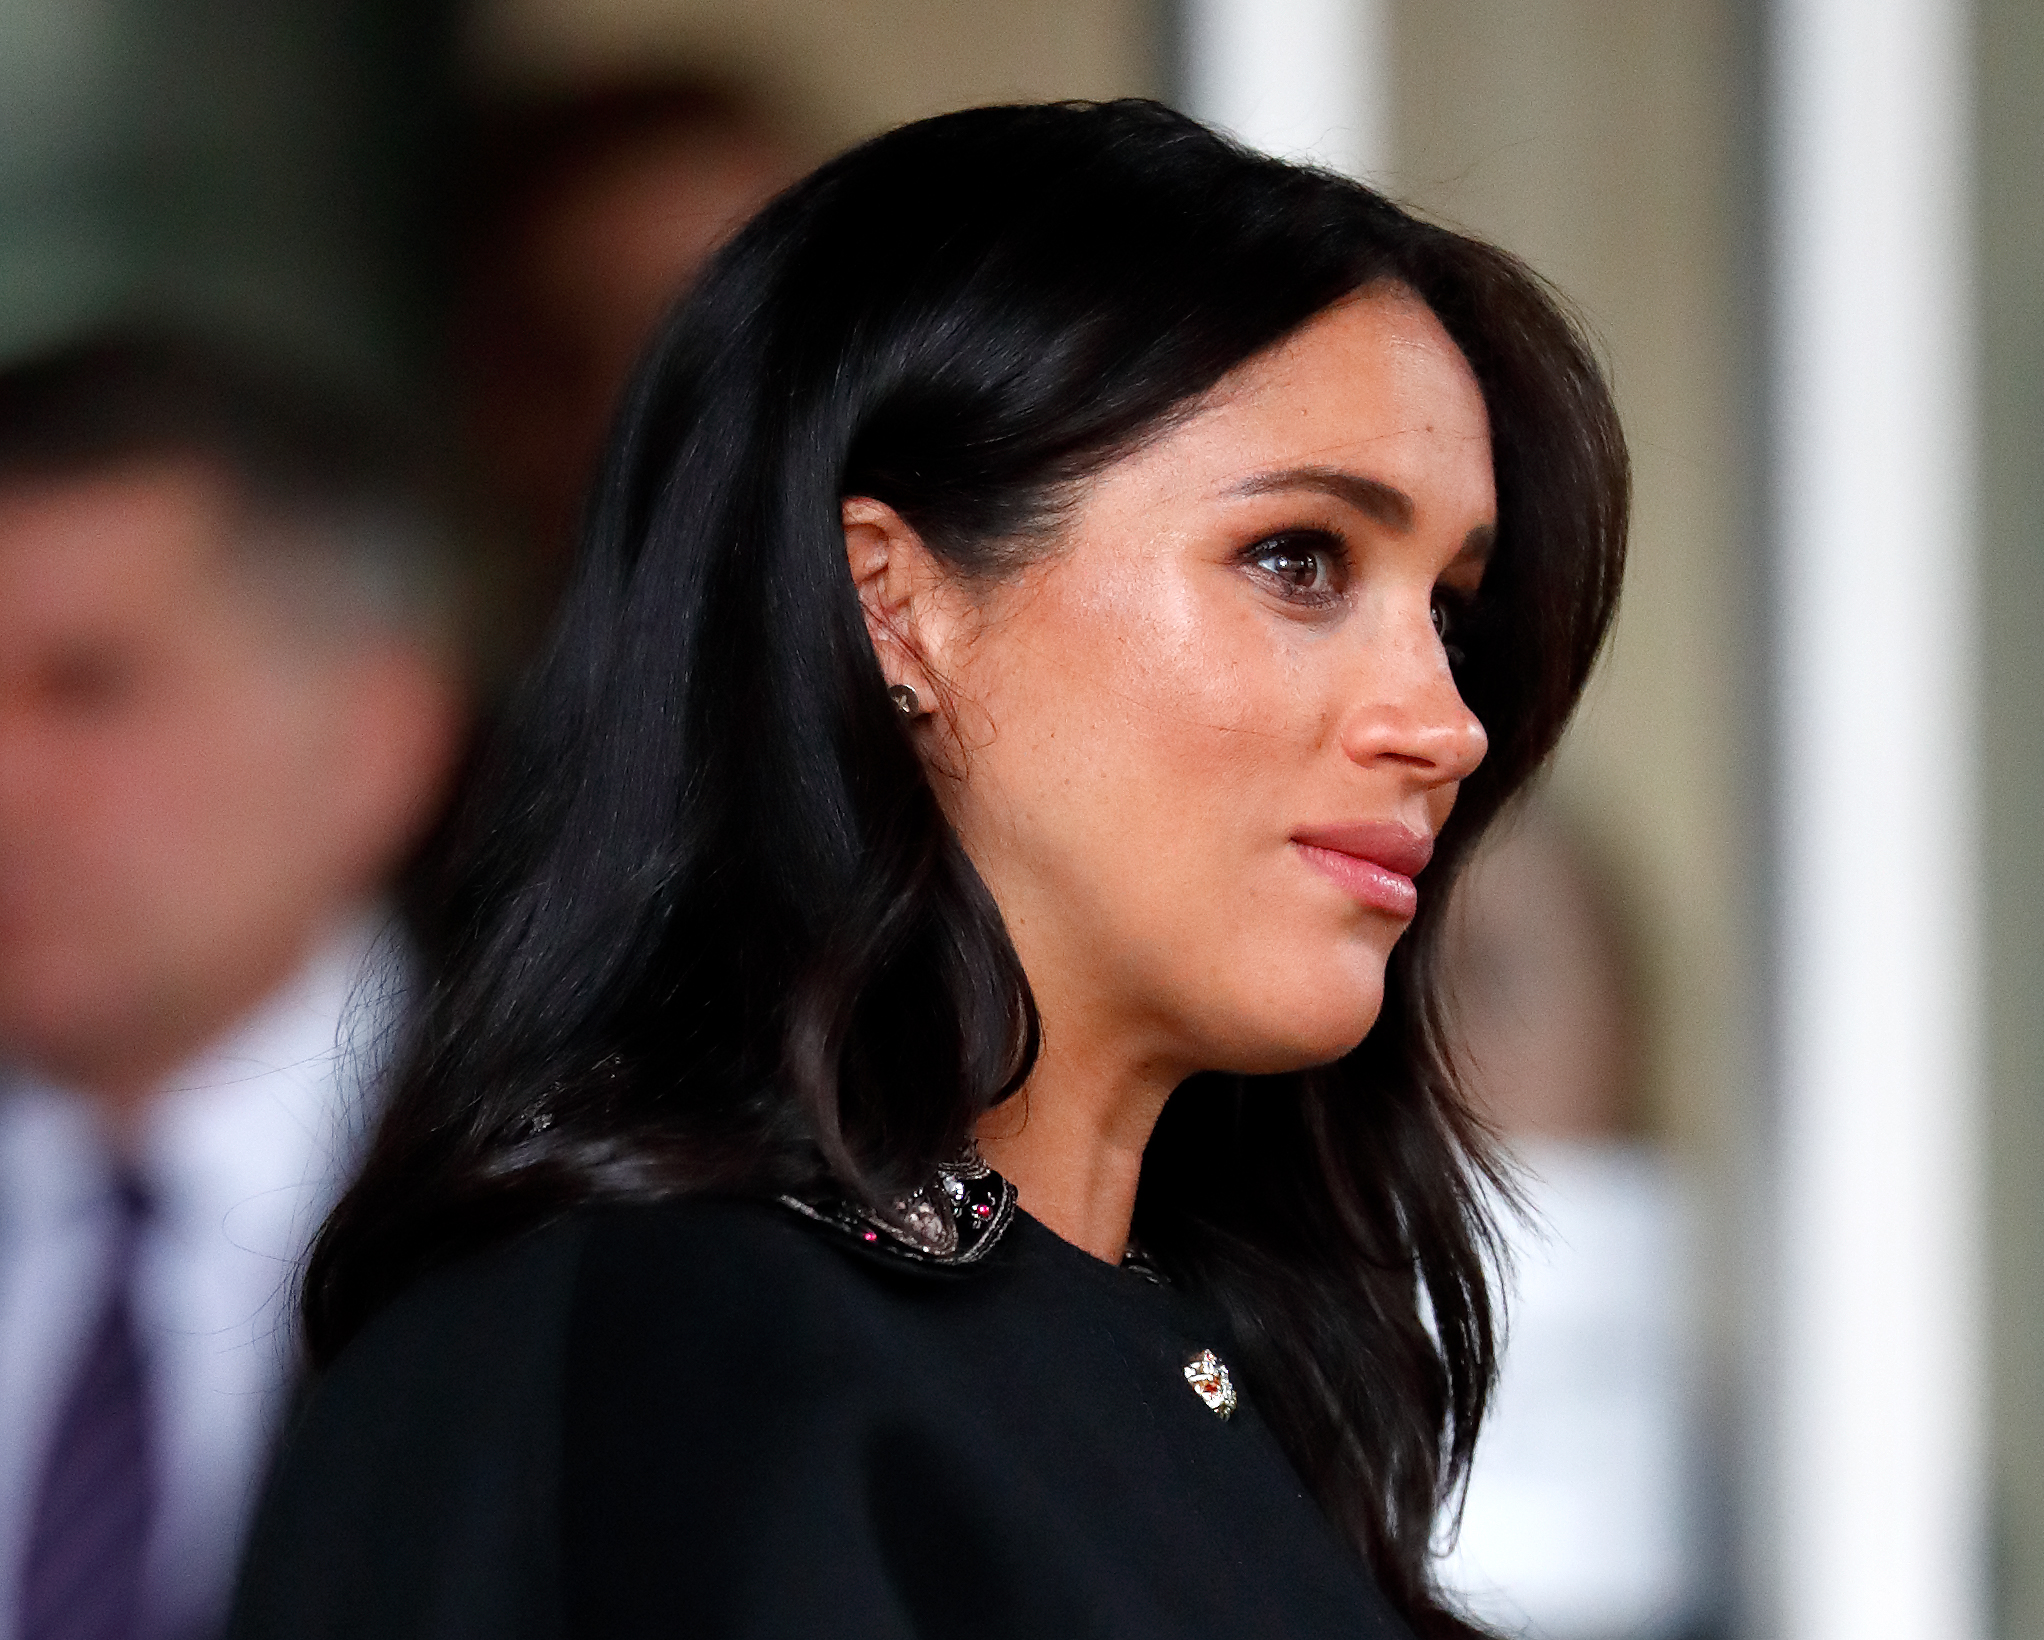 Meghan Markle seen from the side